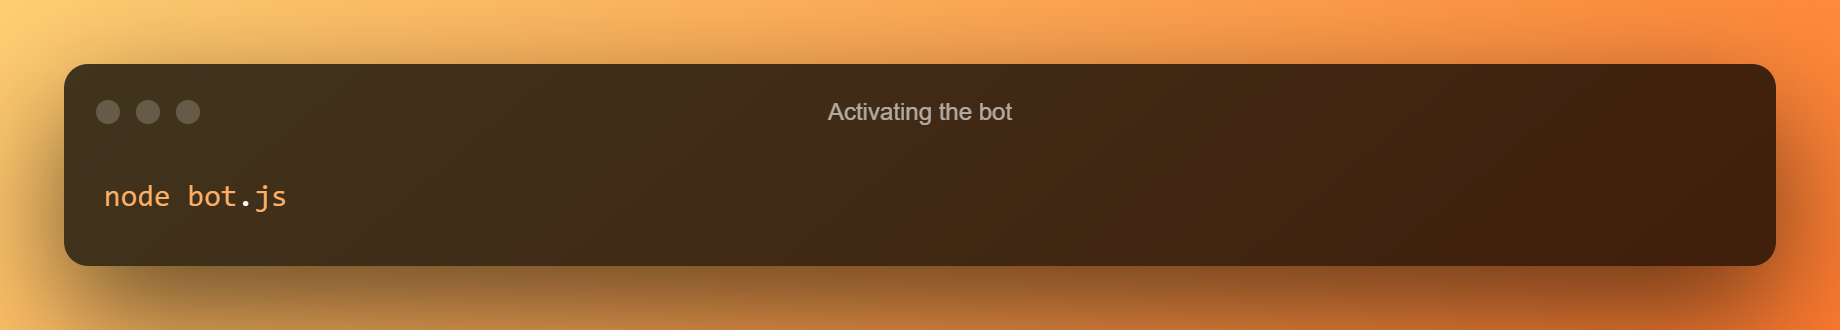 Activating The Bot